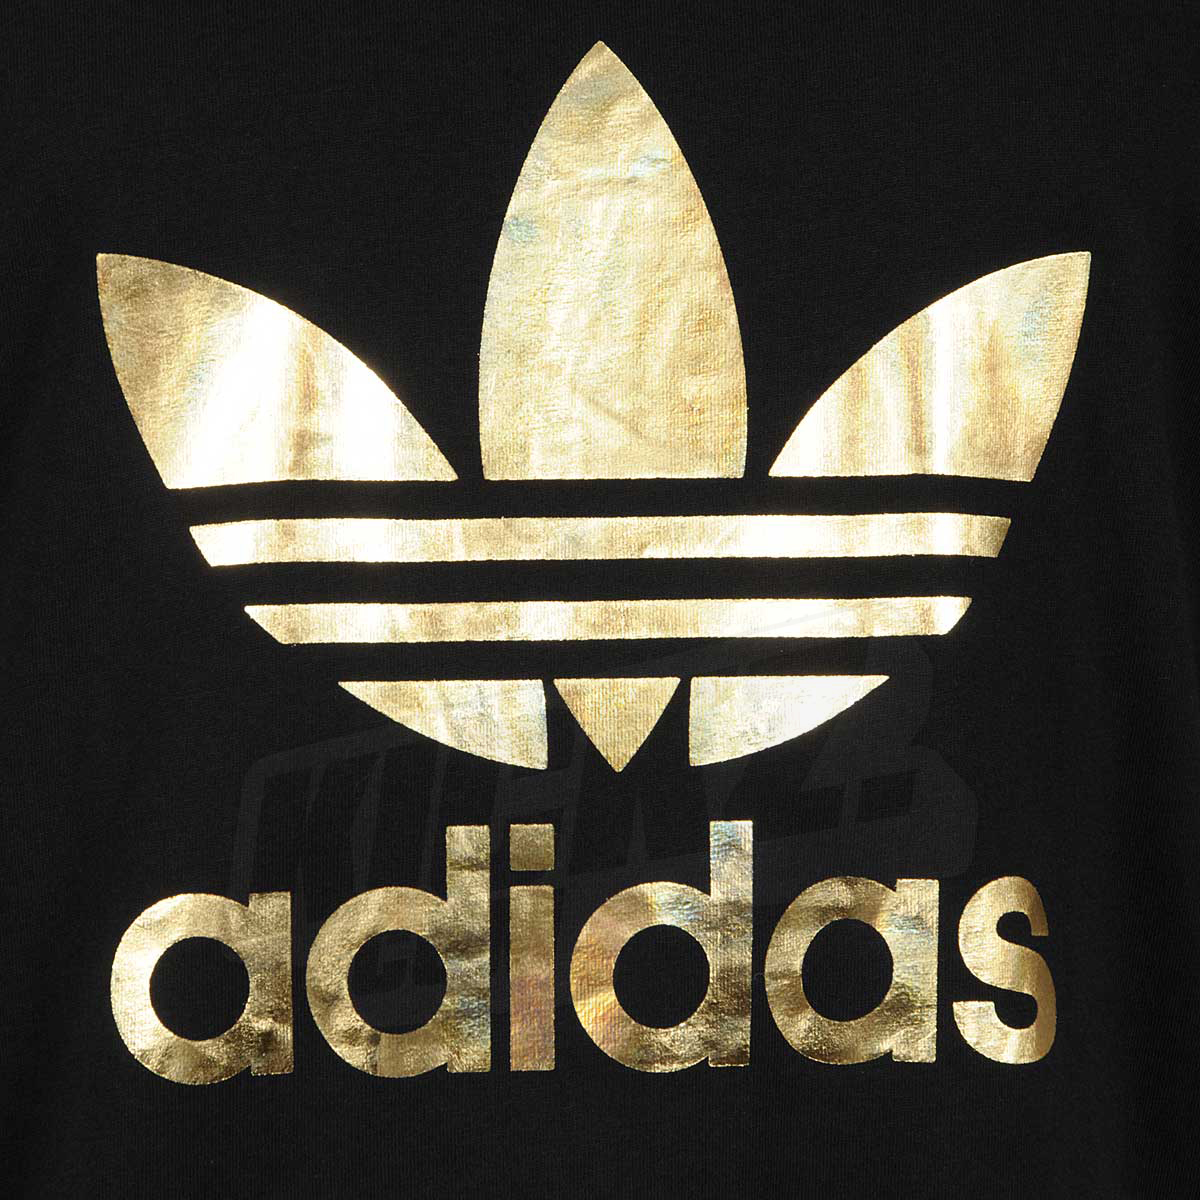 t shirt adidas in roblox